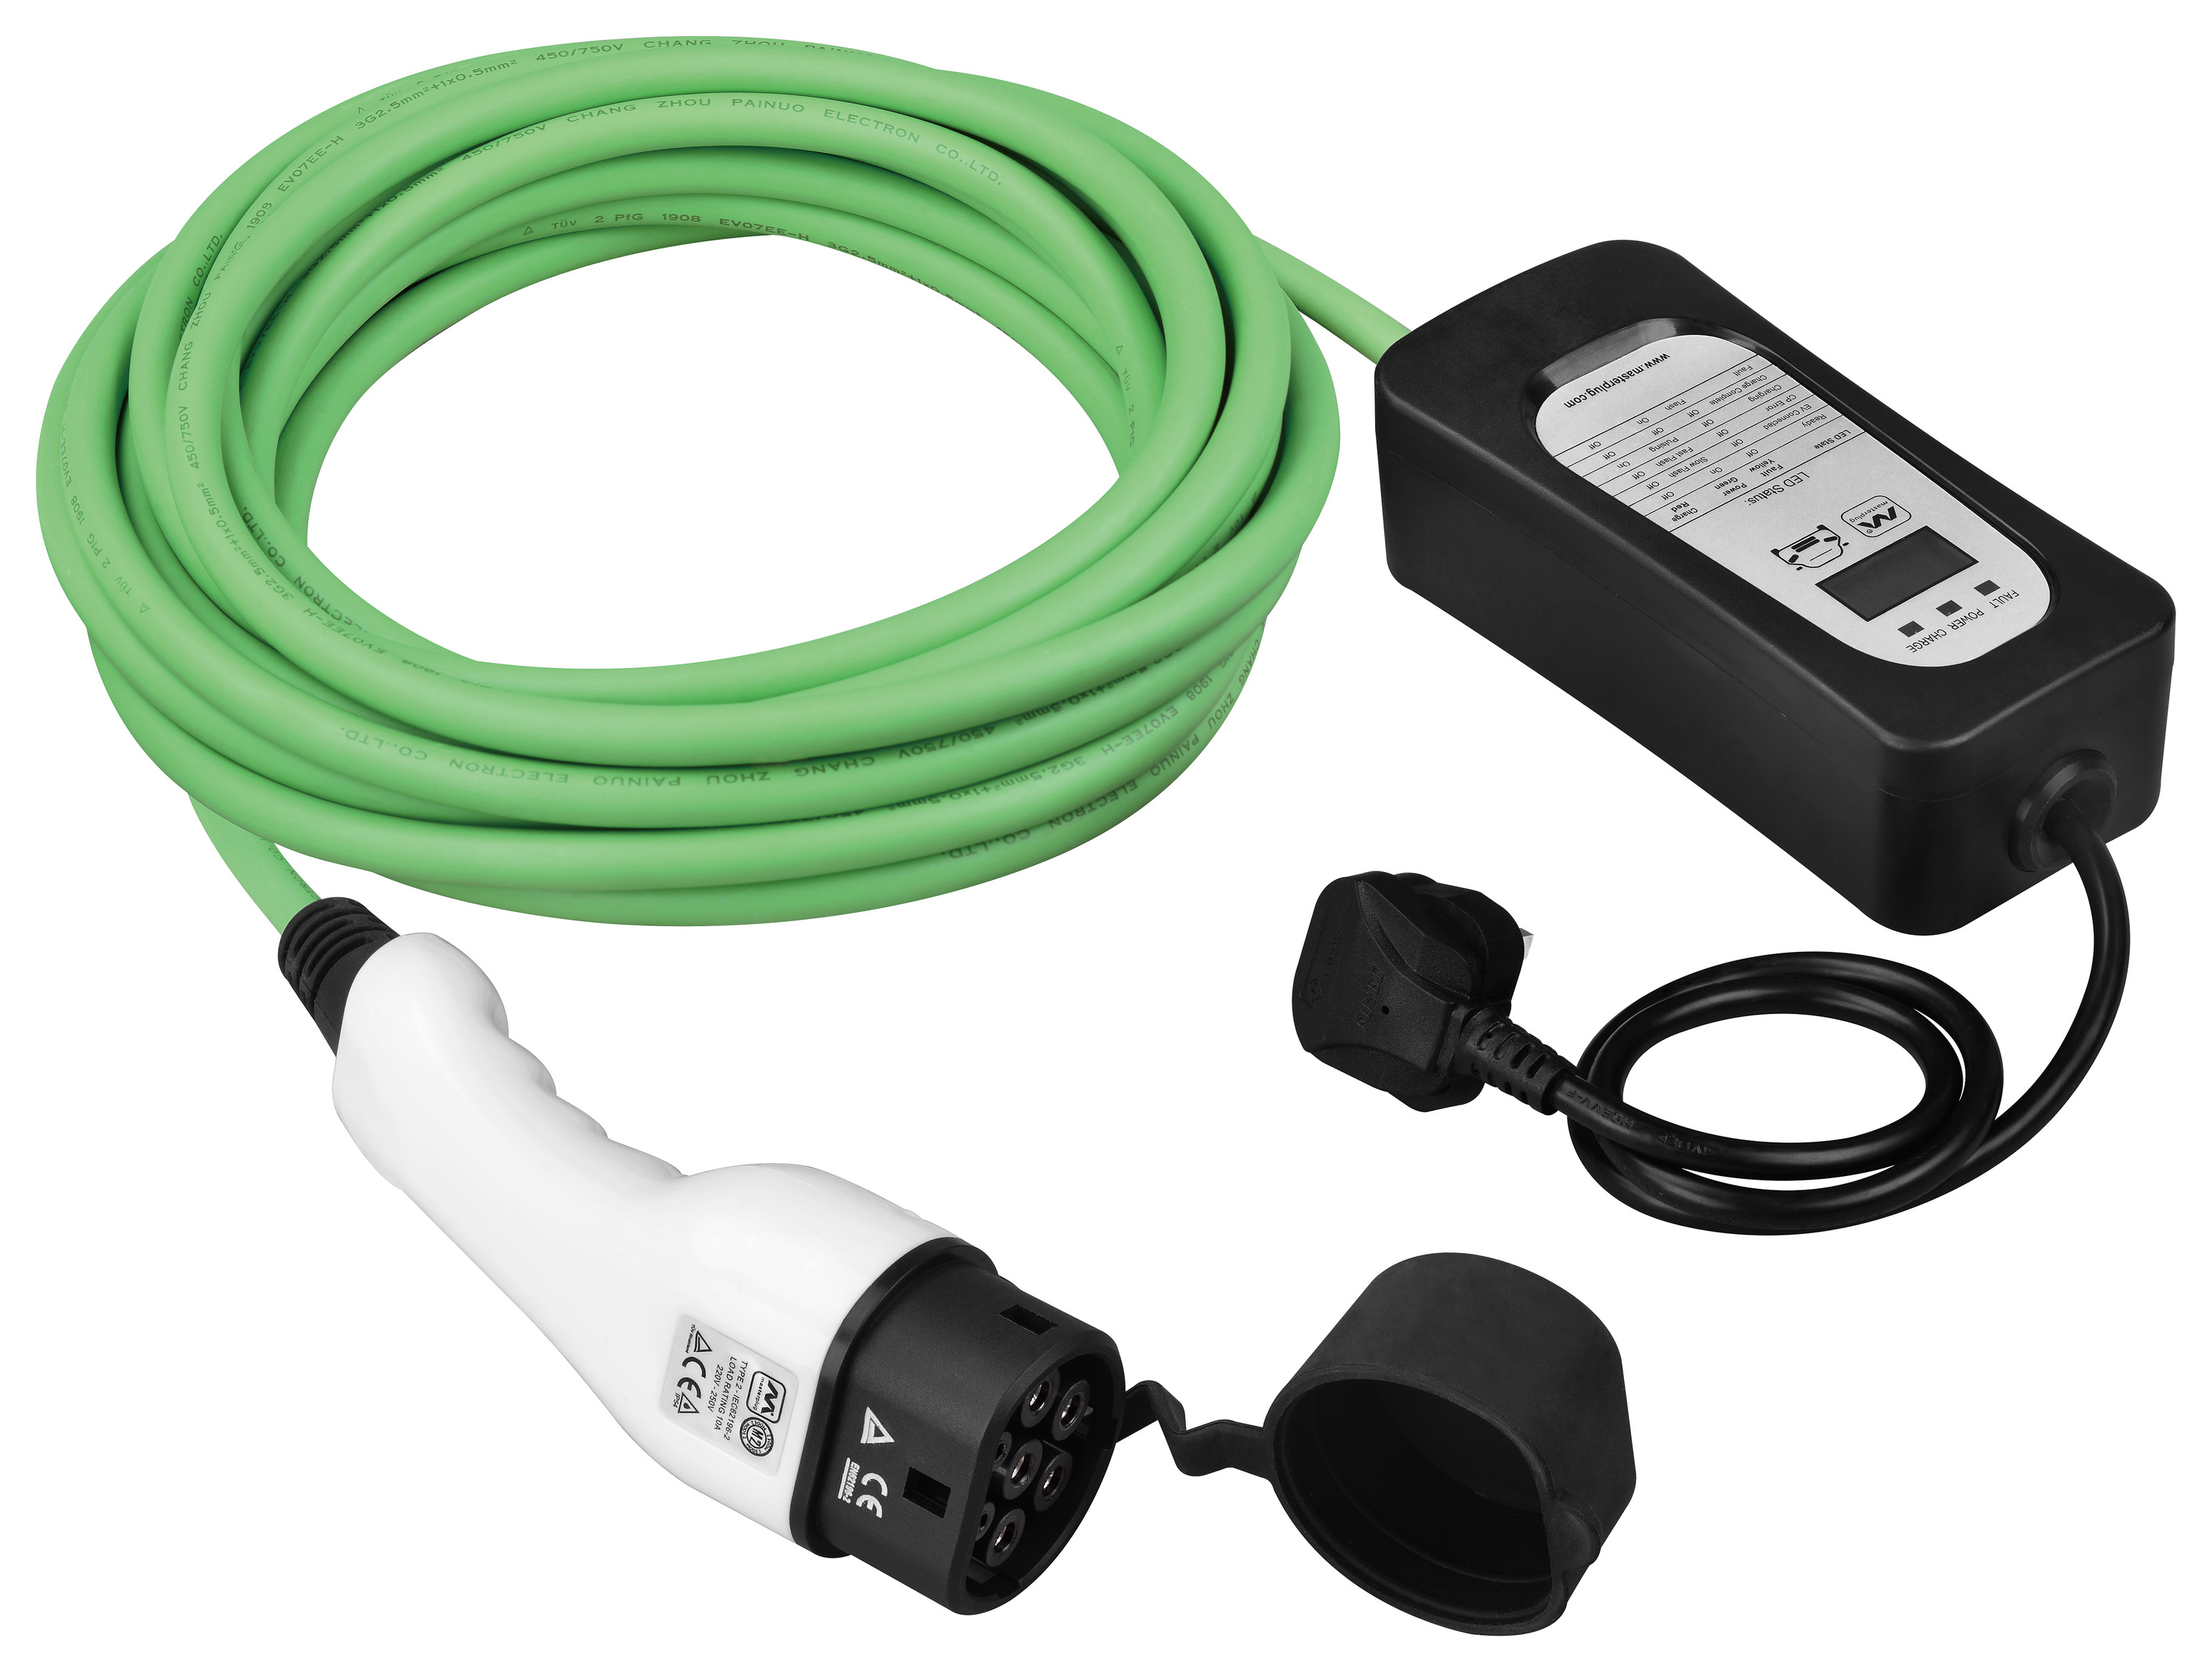 Image of Masterplug Mode 2 Type 2 Electric Car Charging Cable - 10m